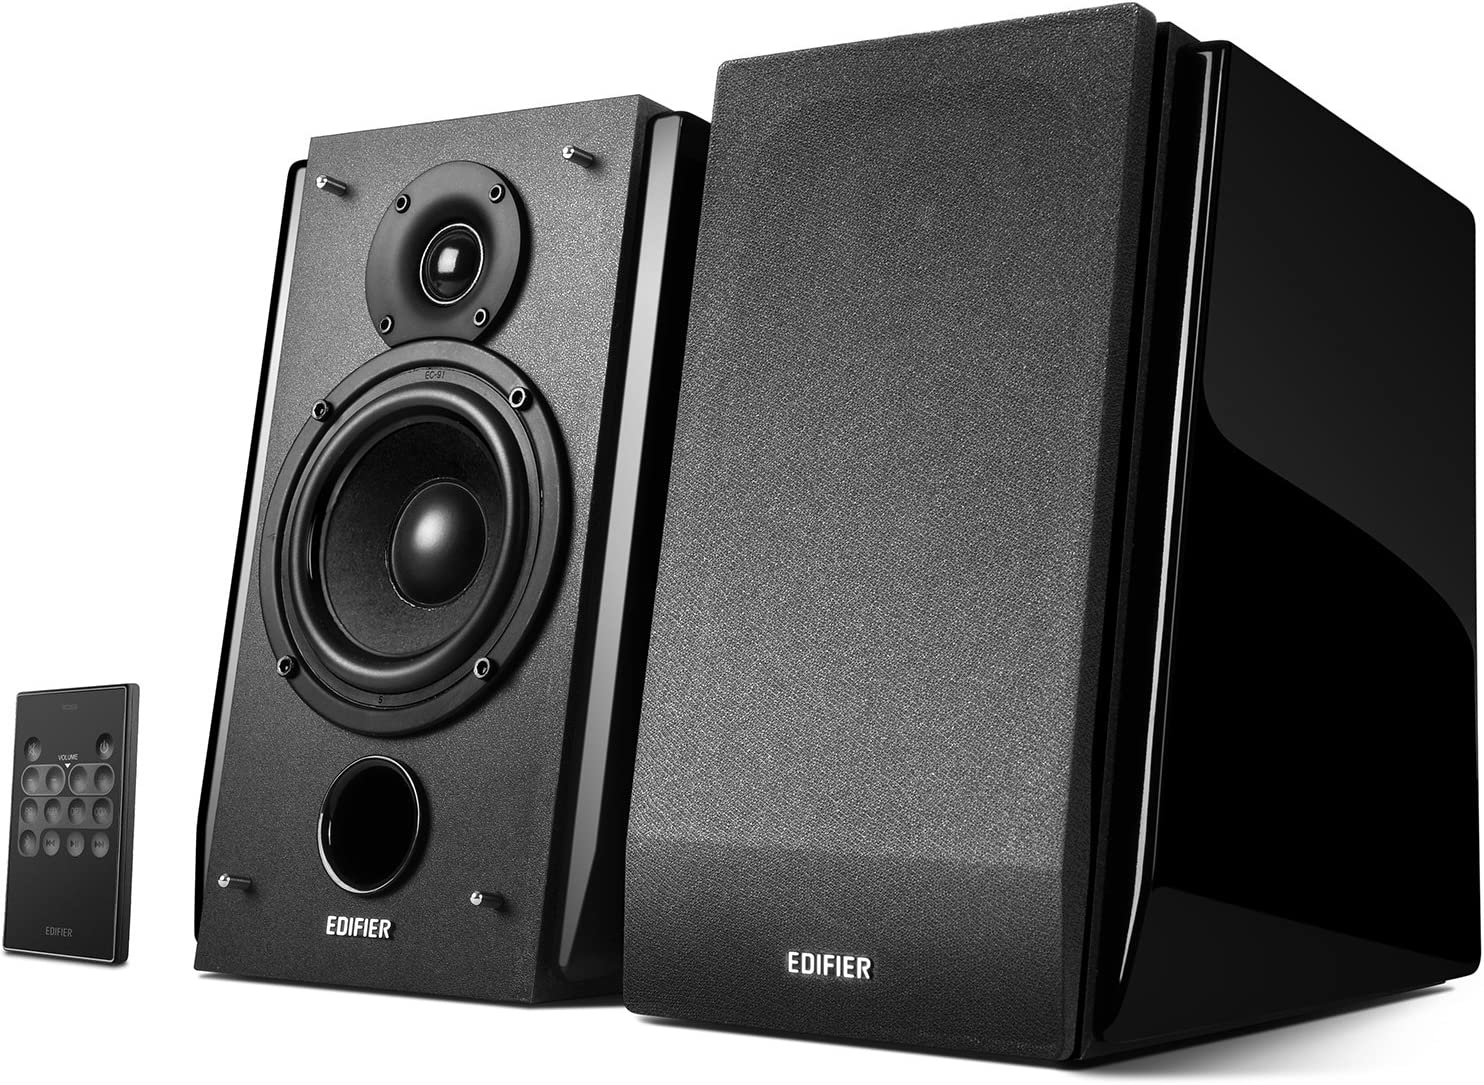 Amazon.com: Edifier R1850DB Active Bookshelf Speakers with Bluetooth and Optical Input - 2.0 Studio Monitor Speaker - Built-in Amplifier with Subwoofer Line Out $160.99